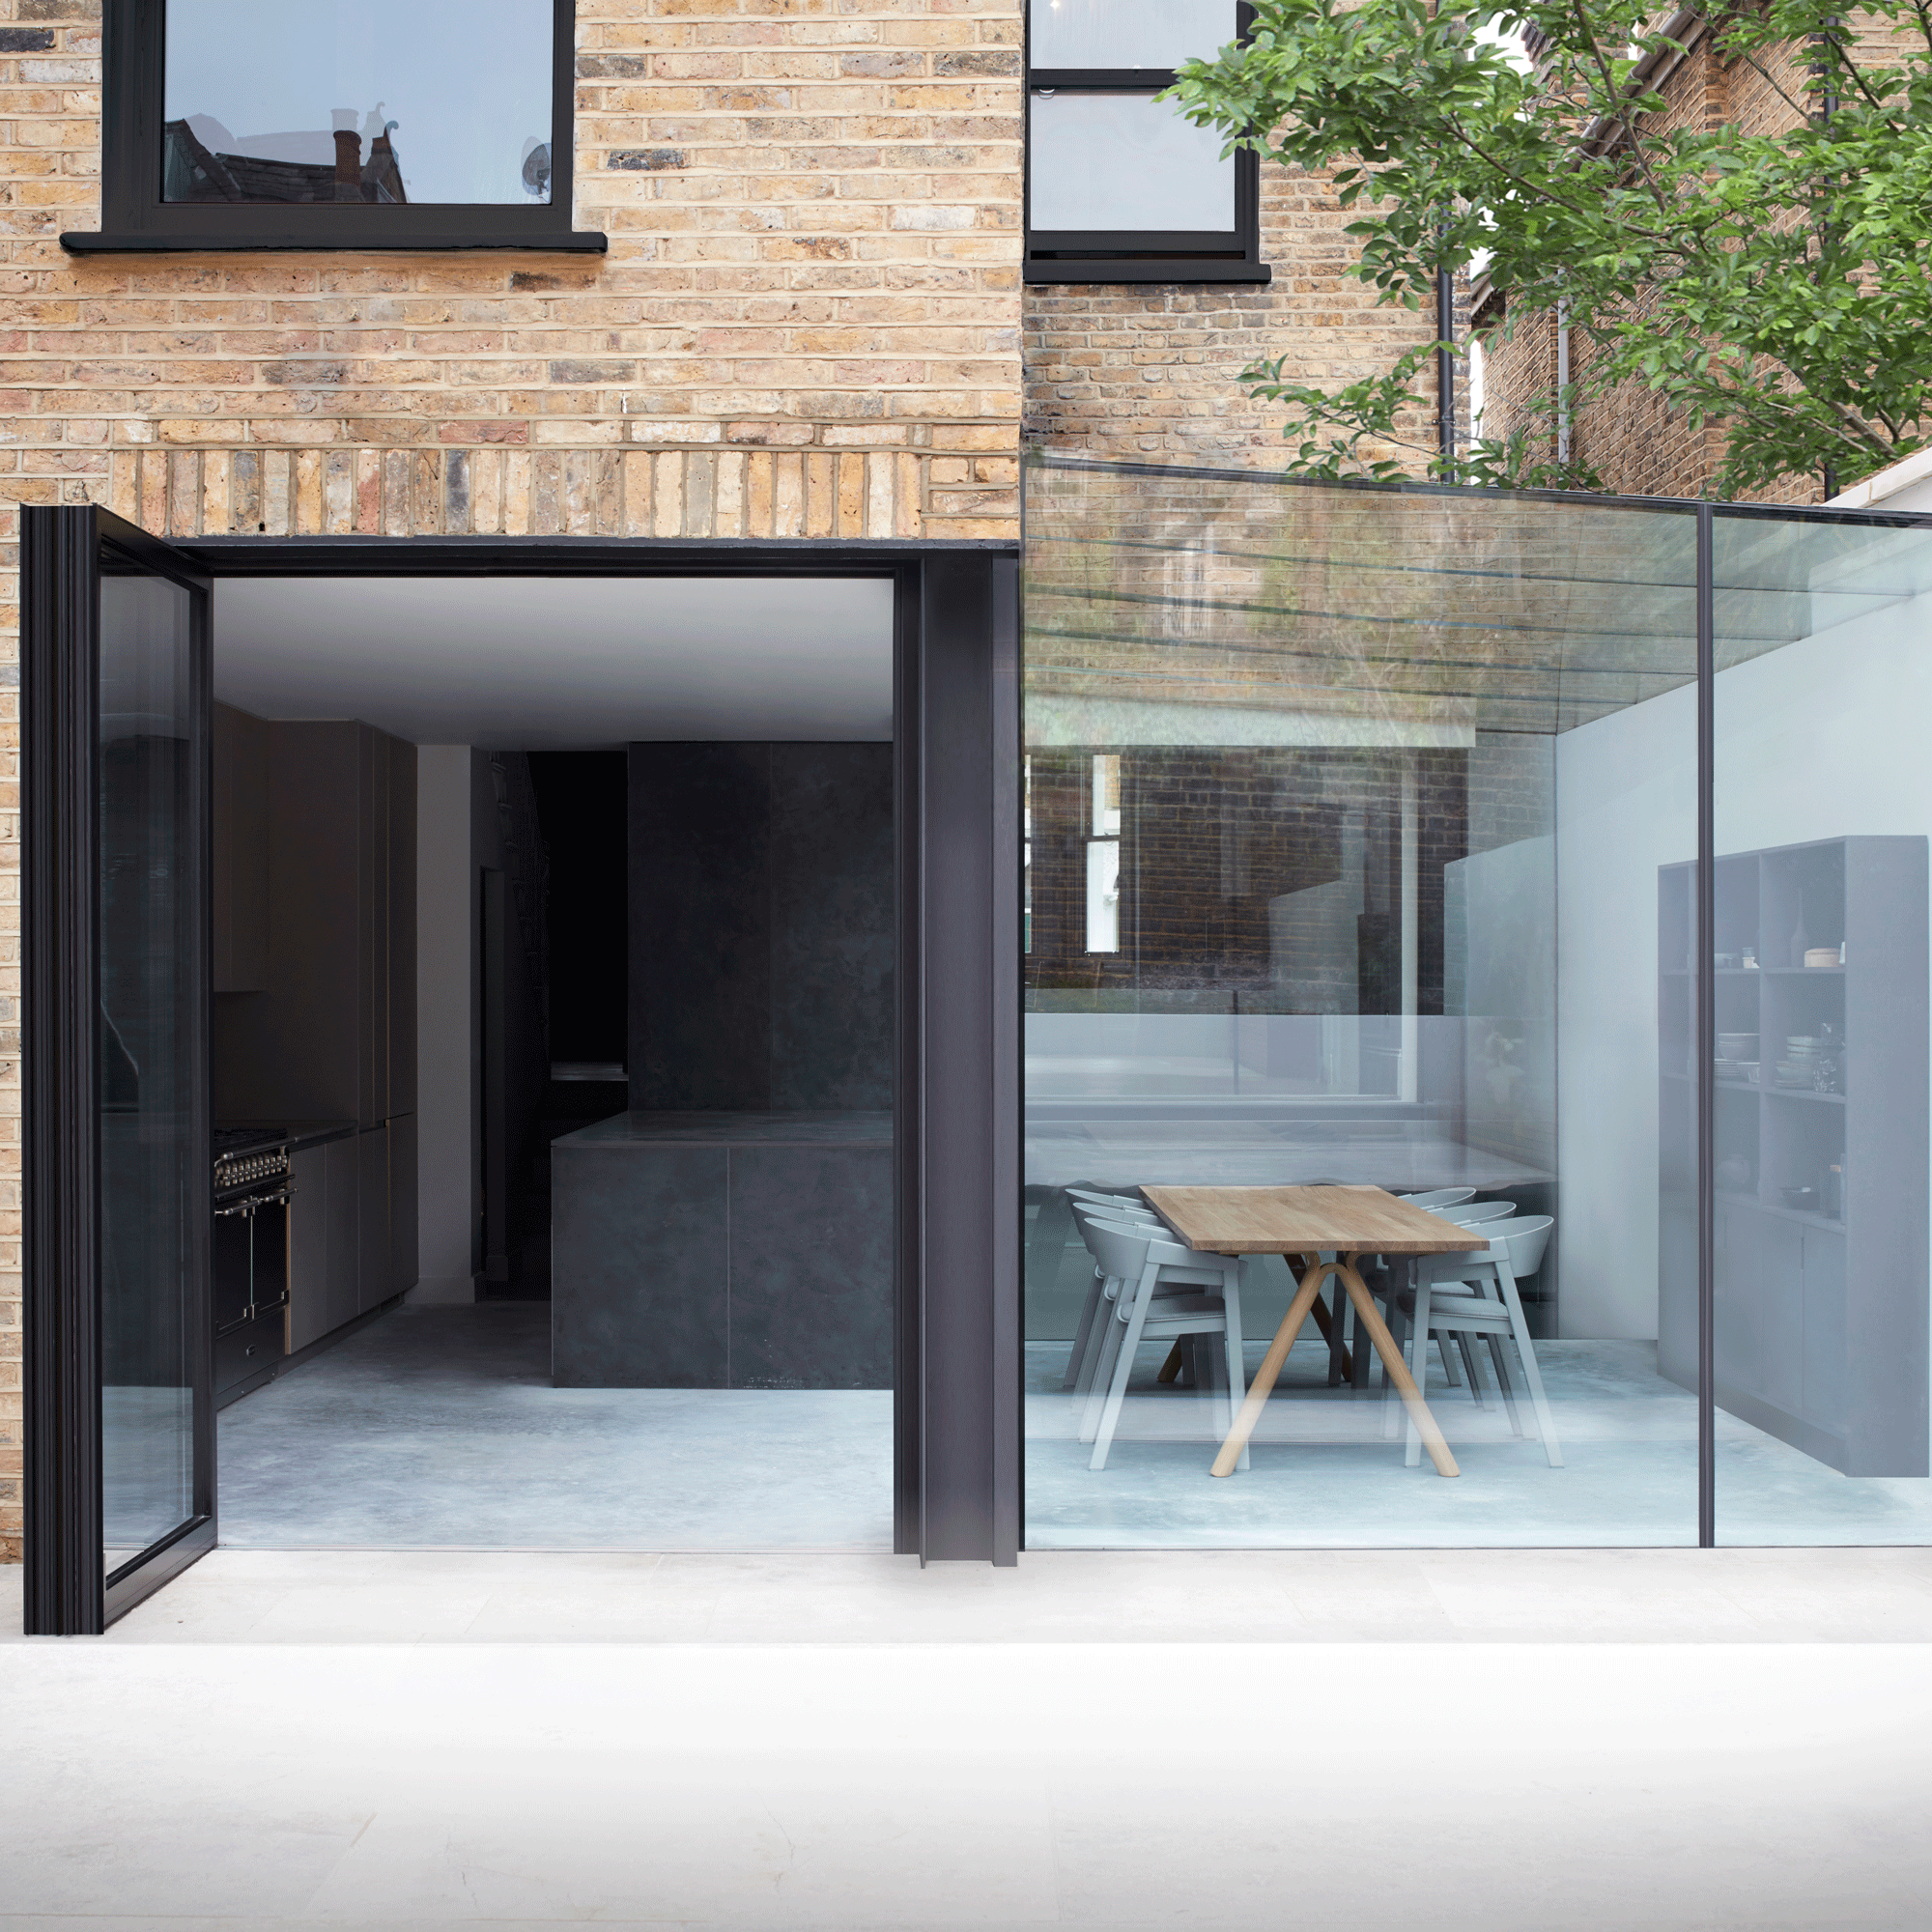 Kitchen in glass box extension